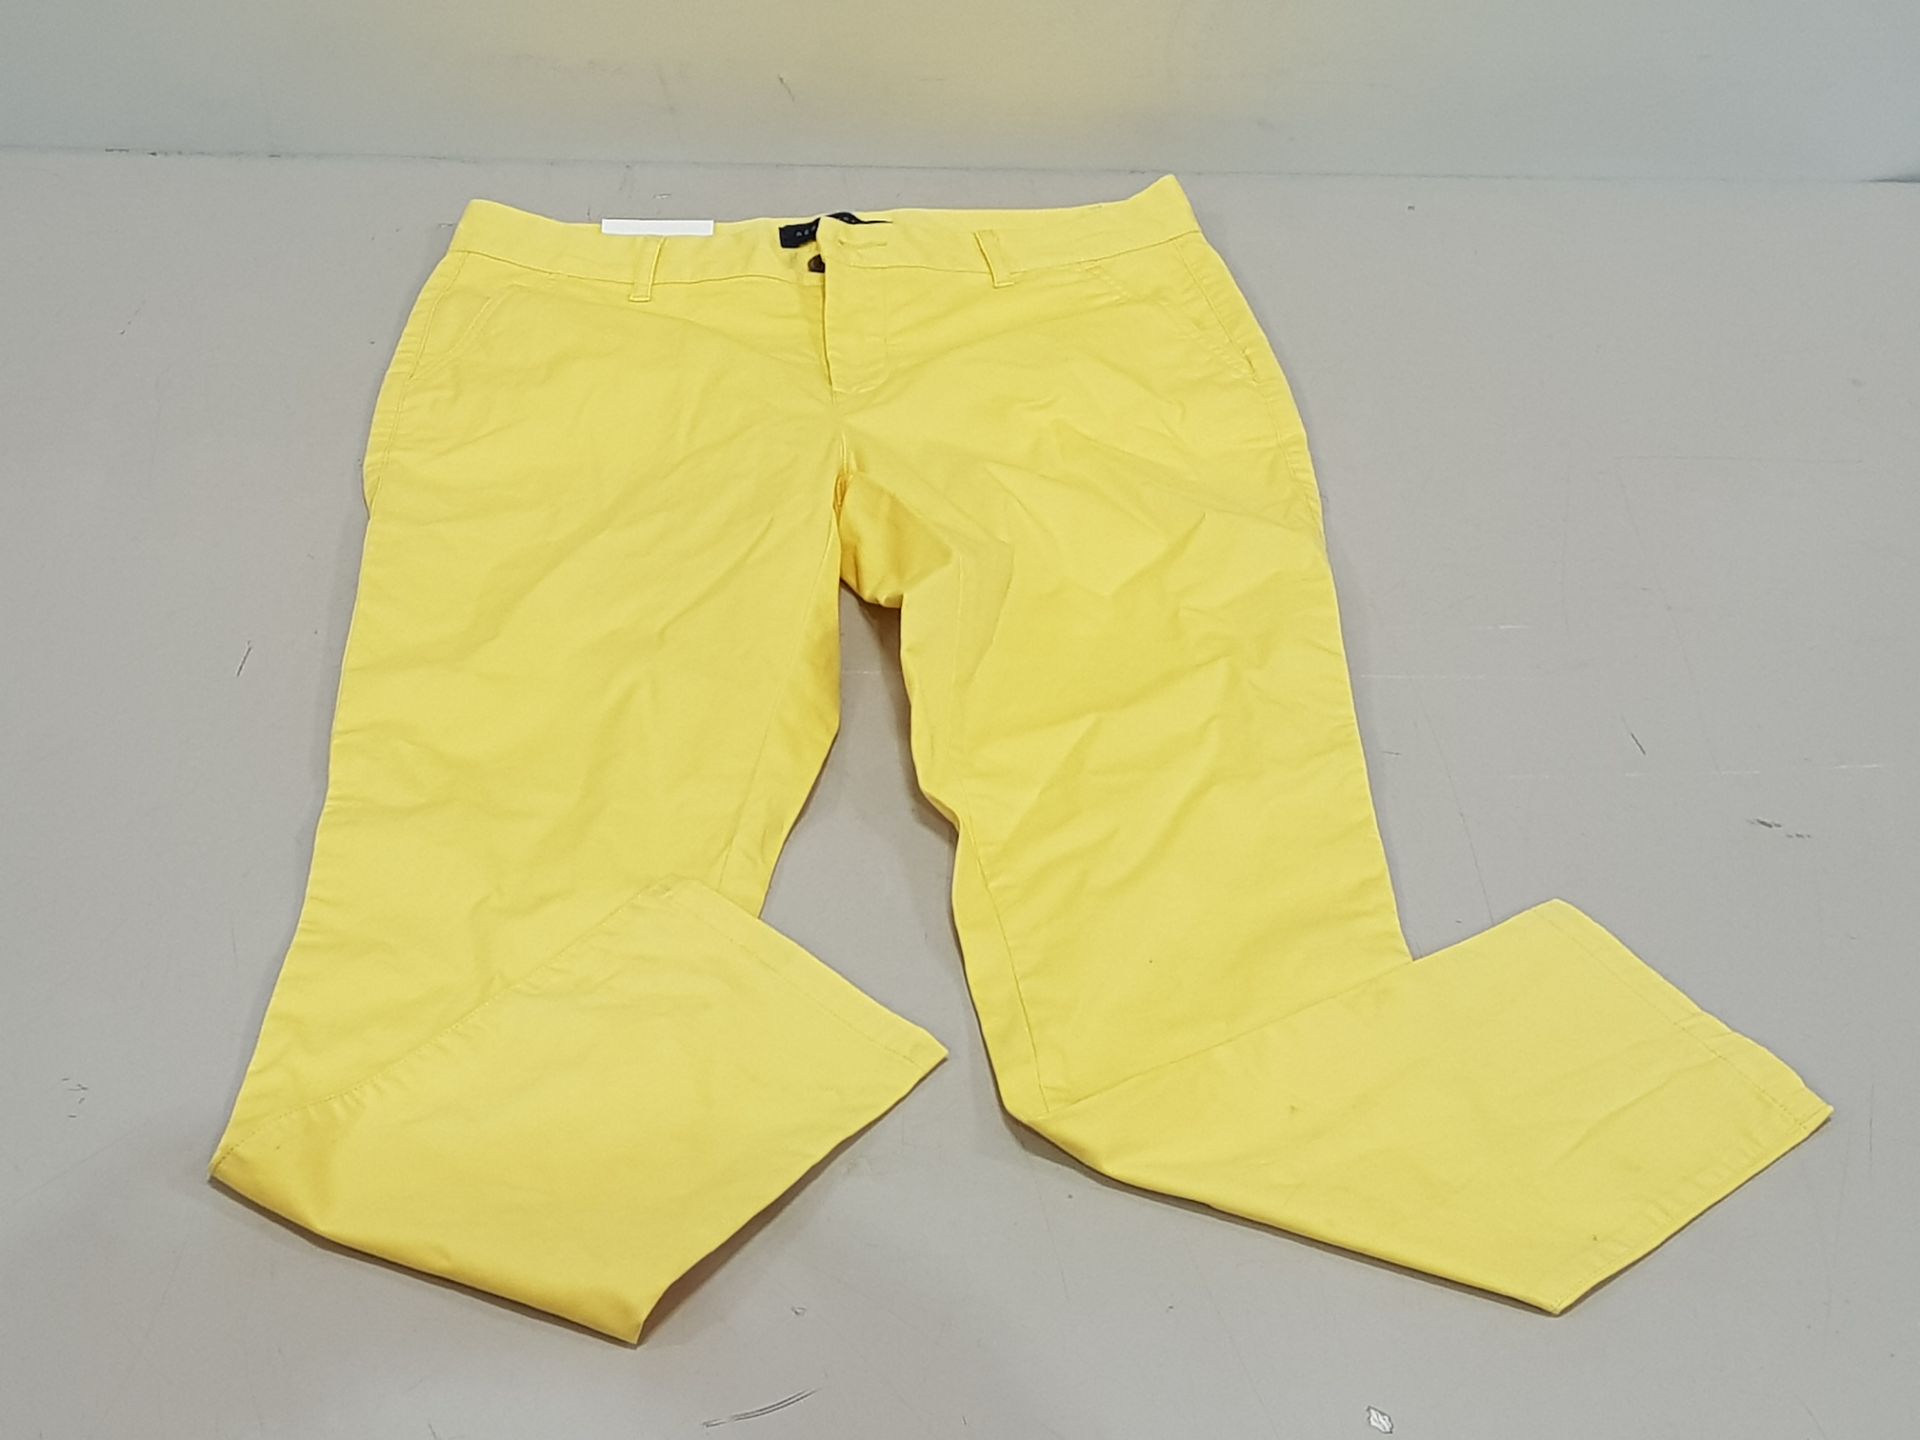 30 X BRAND NEW AEROPOSTALE WOMEN'S CHINO'S IN YELLOW SIZE 32R IN ONE BOX